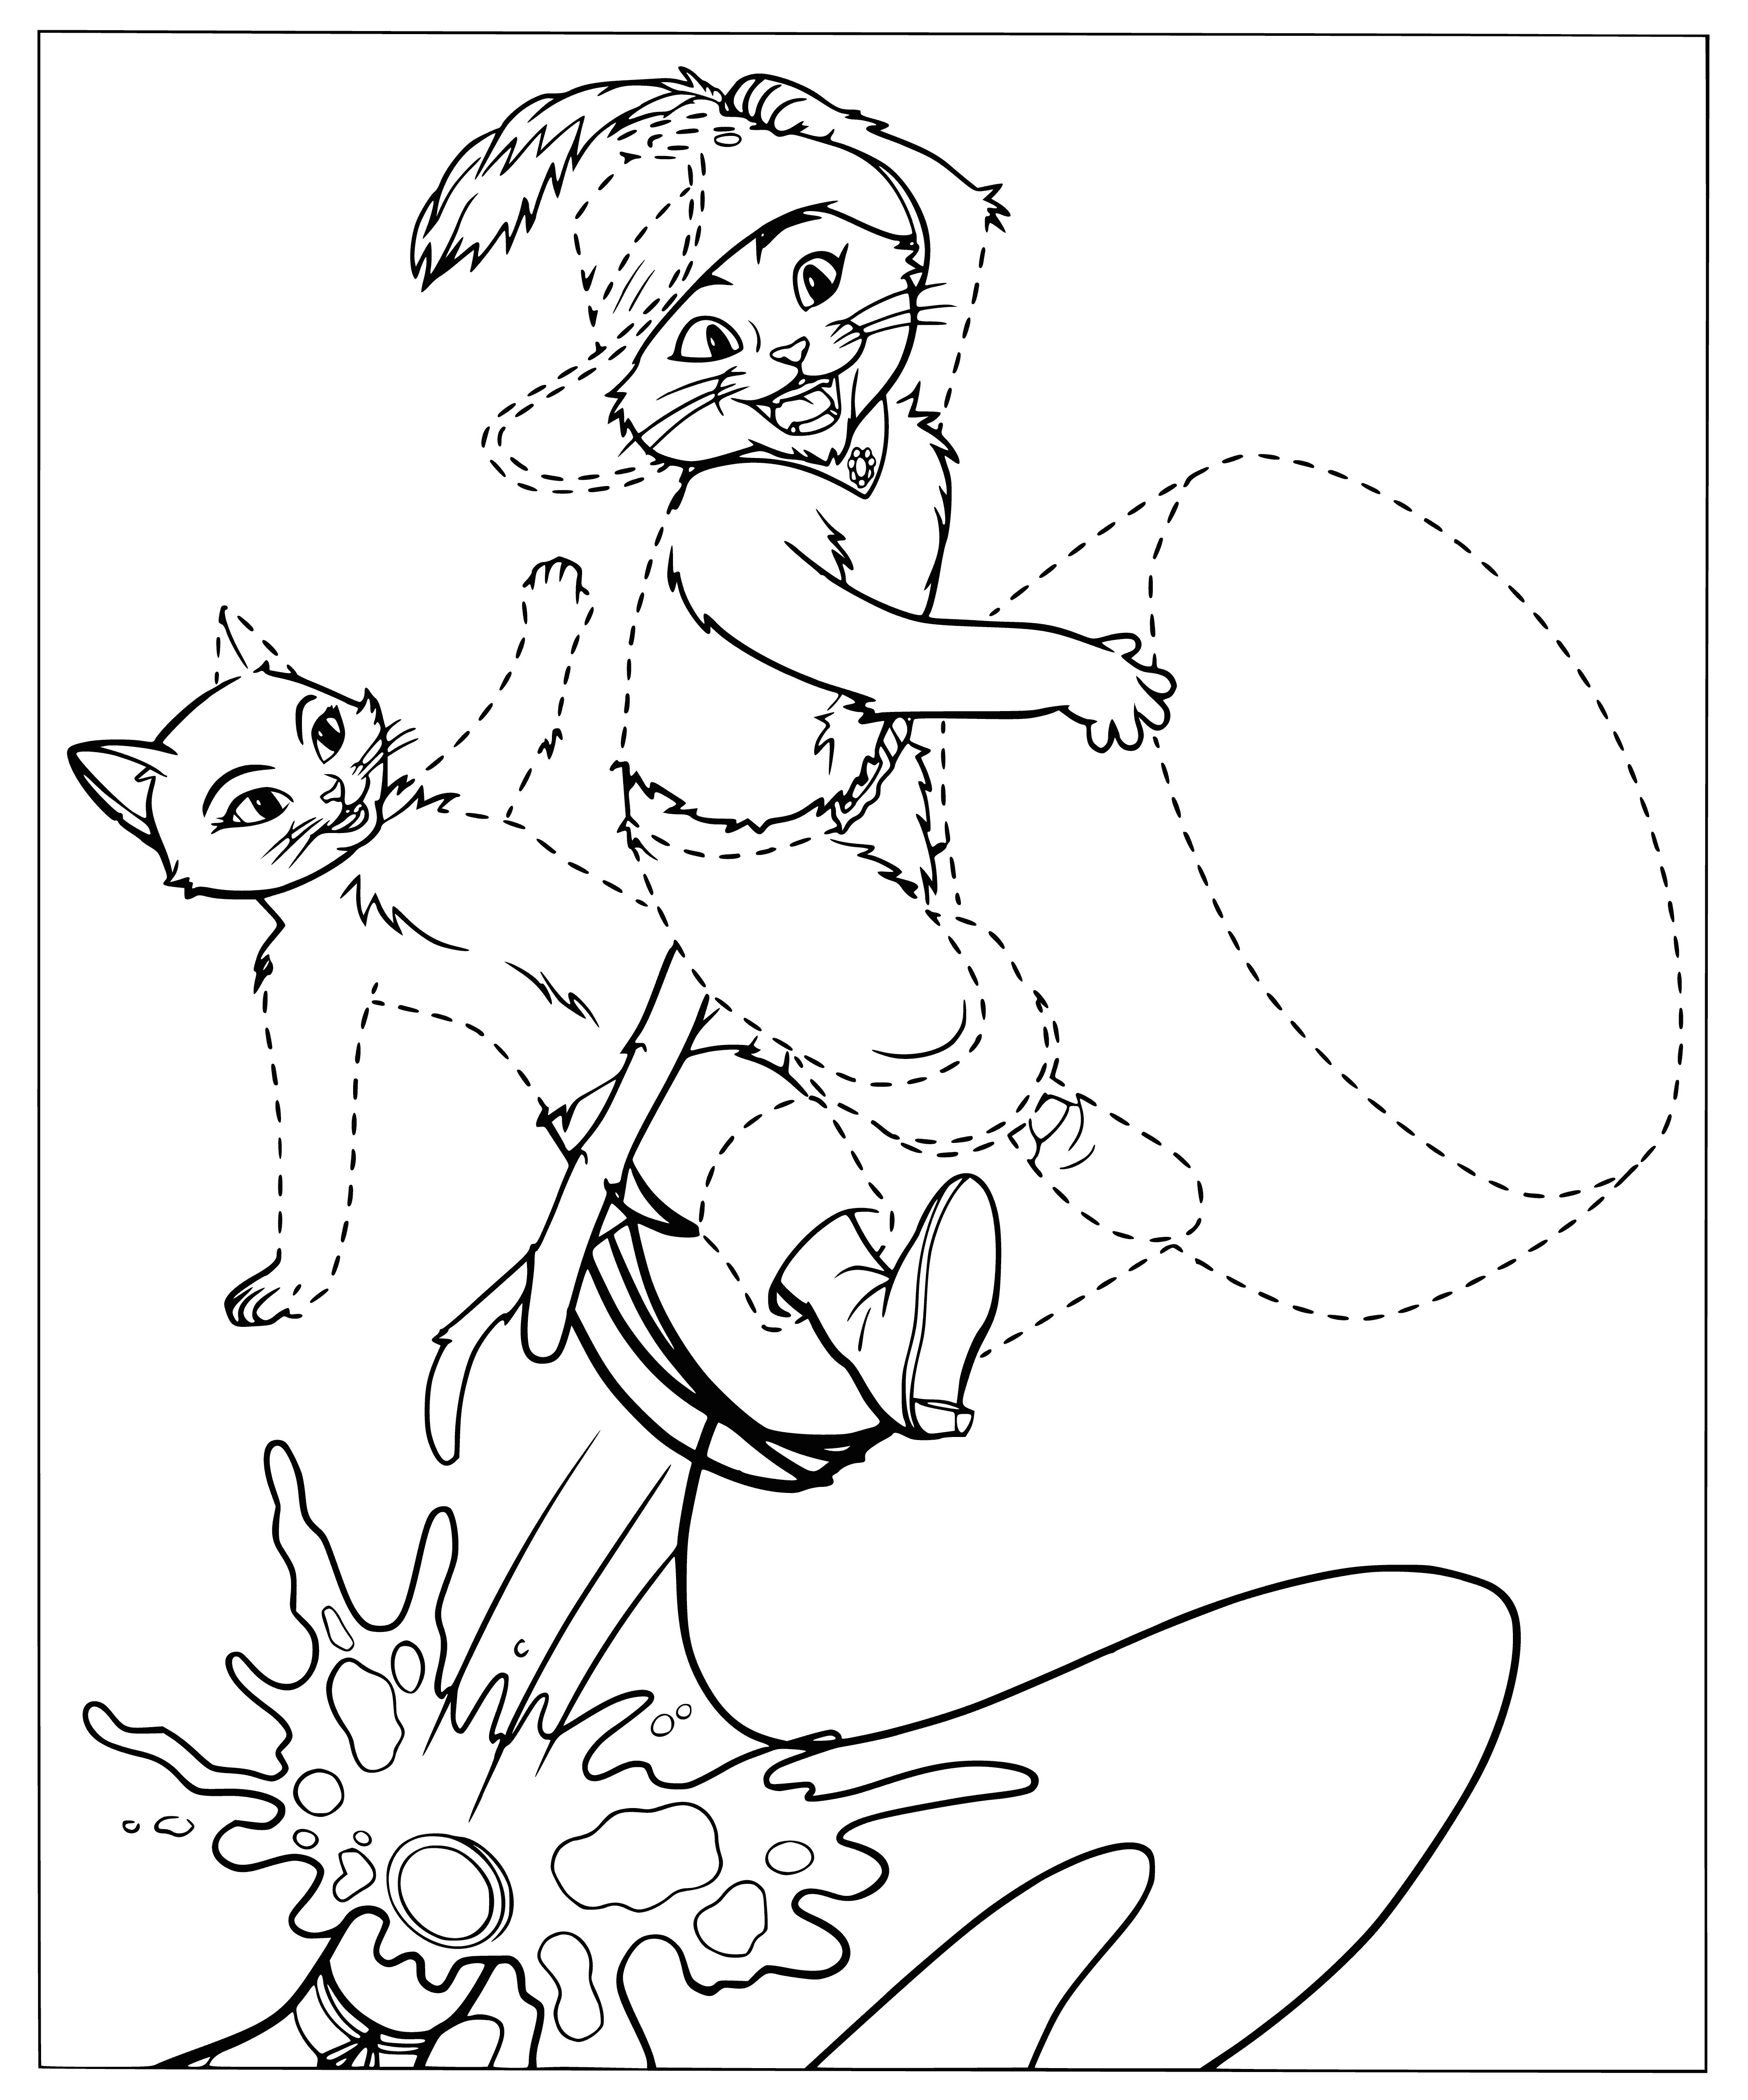 coloring page: Puss in Boots is riding a cork, wearing a blue hat, blue coat, and white boots. #storytelling